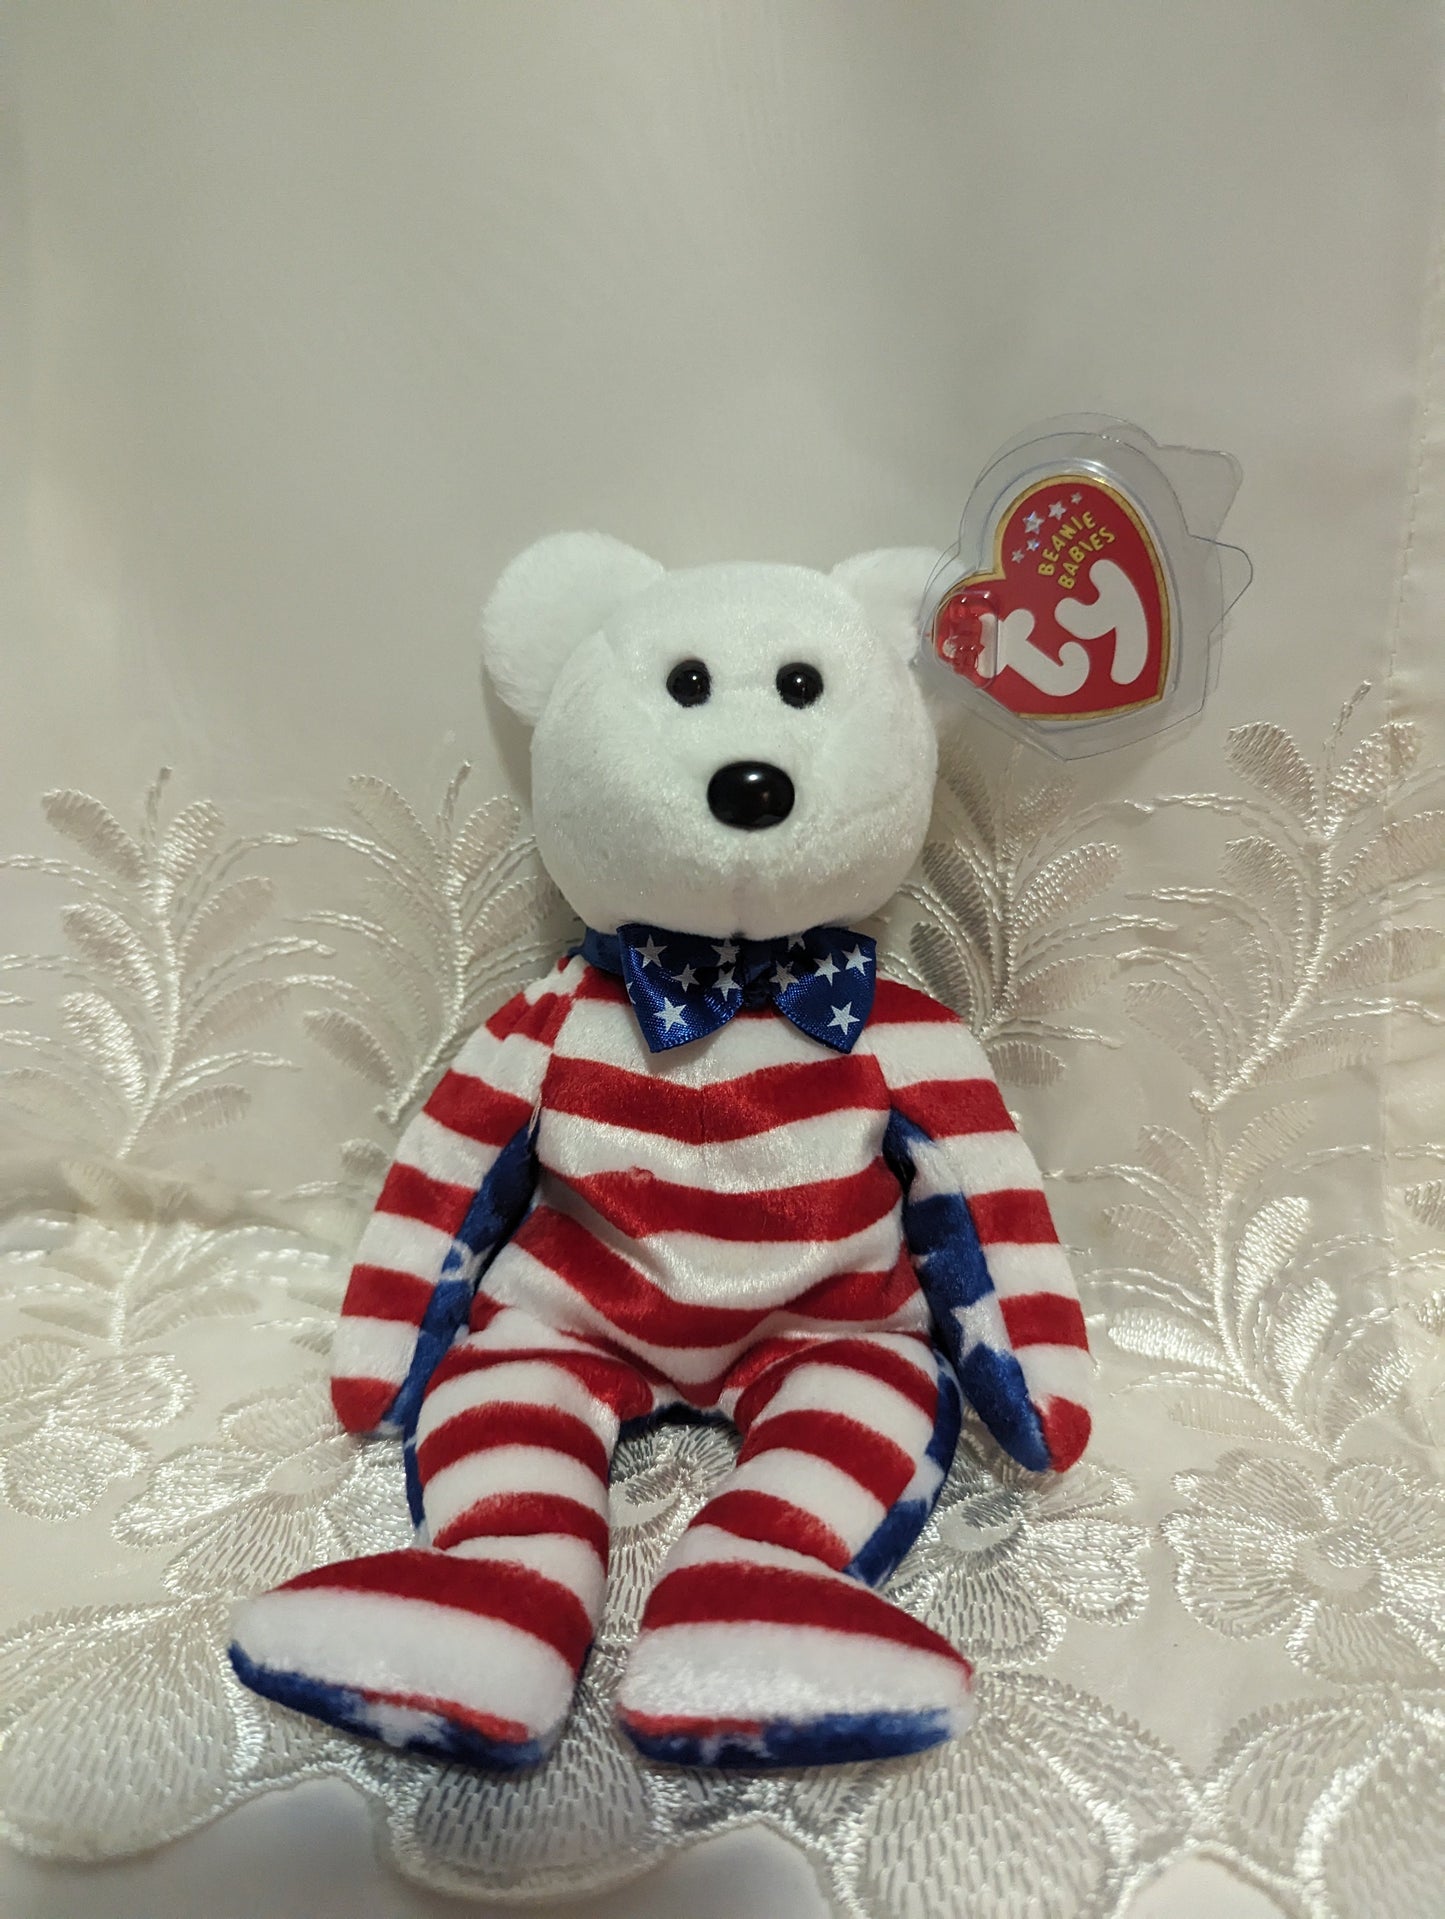 Ty Beanie Baby - Liberty the bear (8.5in) White Face Version - Vintage Beanies Canada